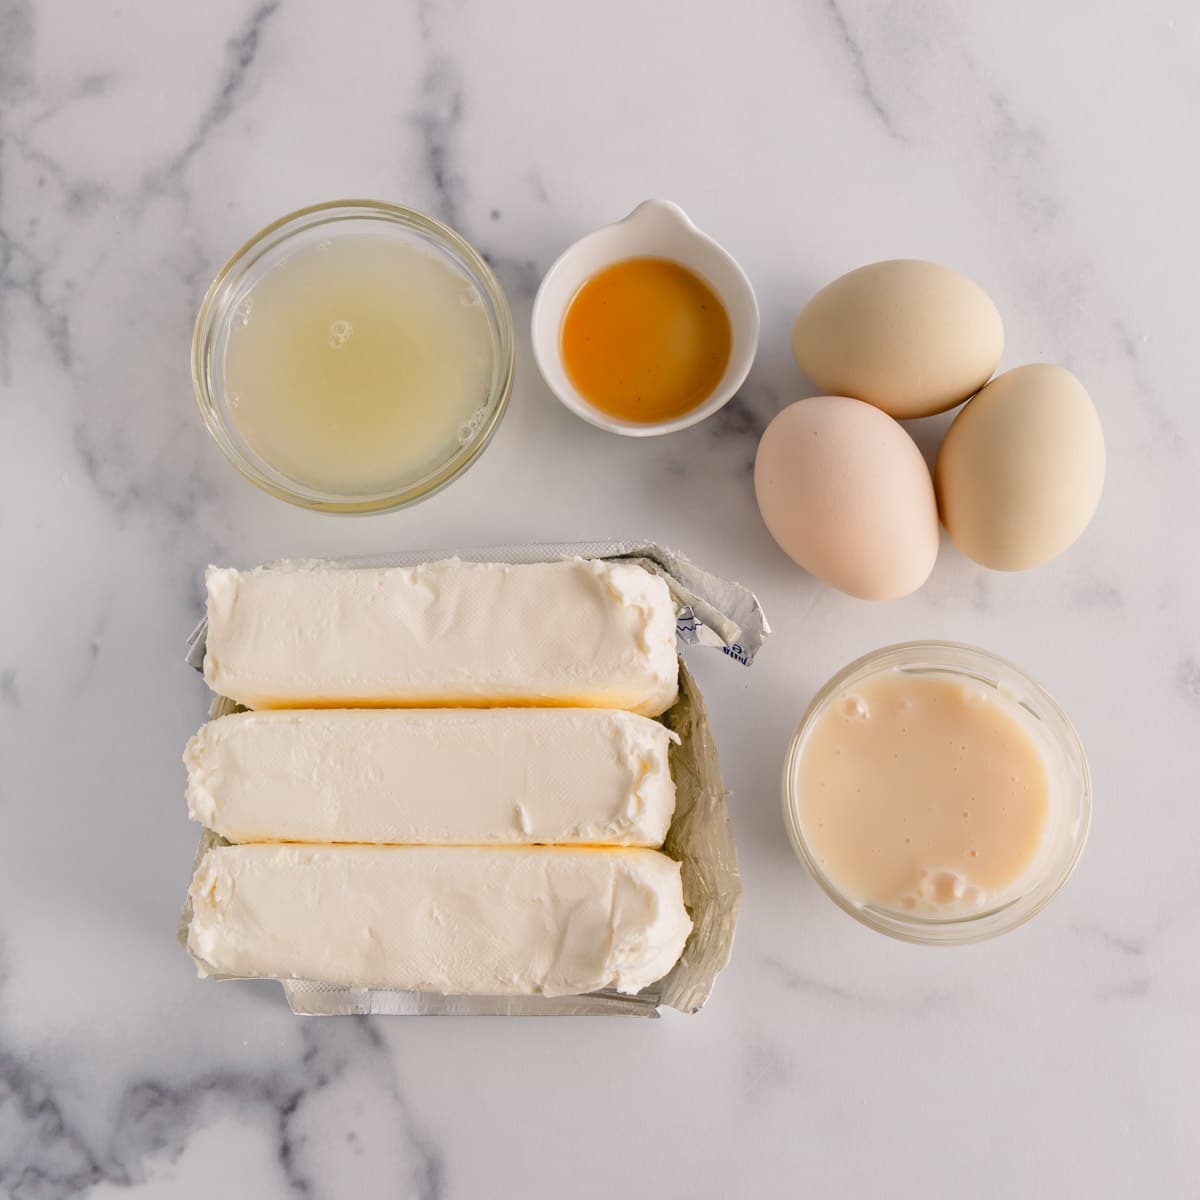 Ingredients to make a cheesecake filling.